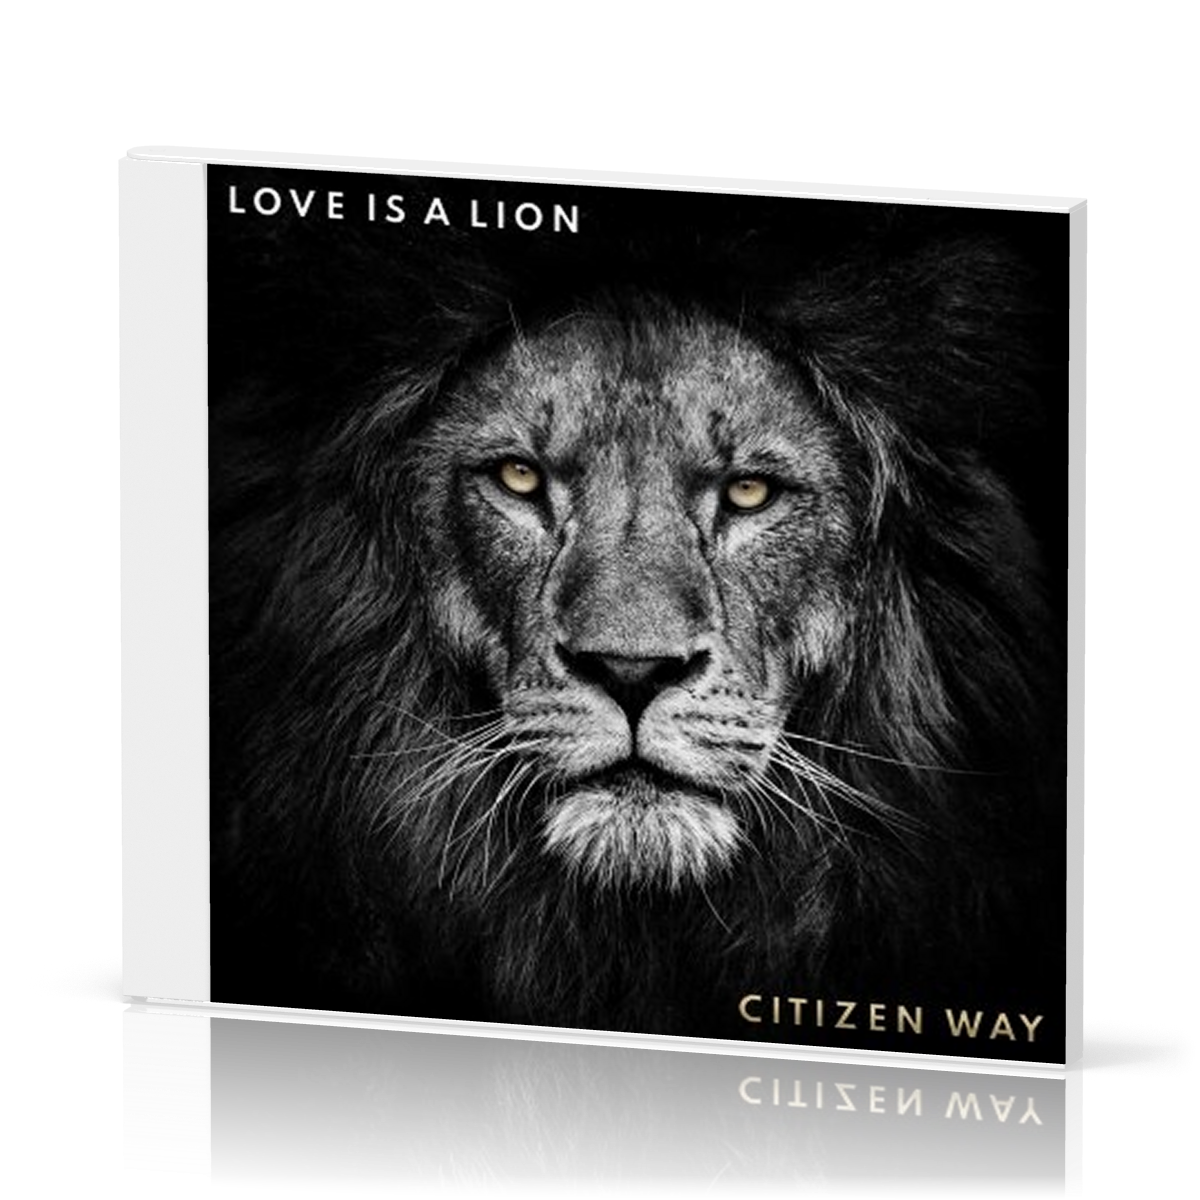 Love is a lion - CD